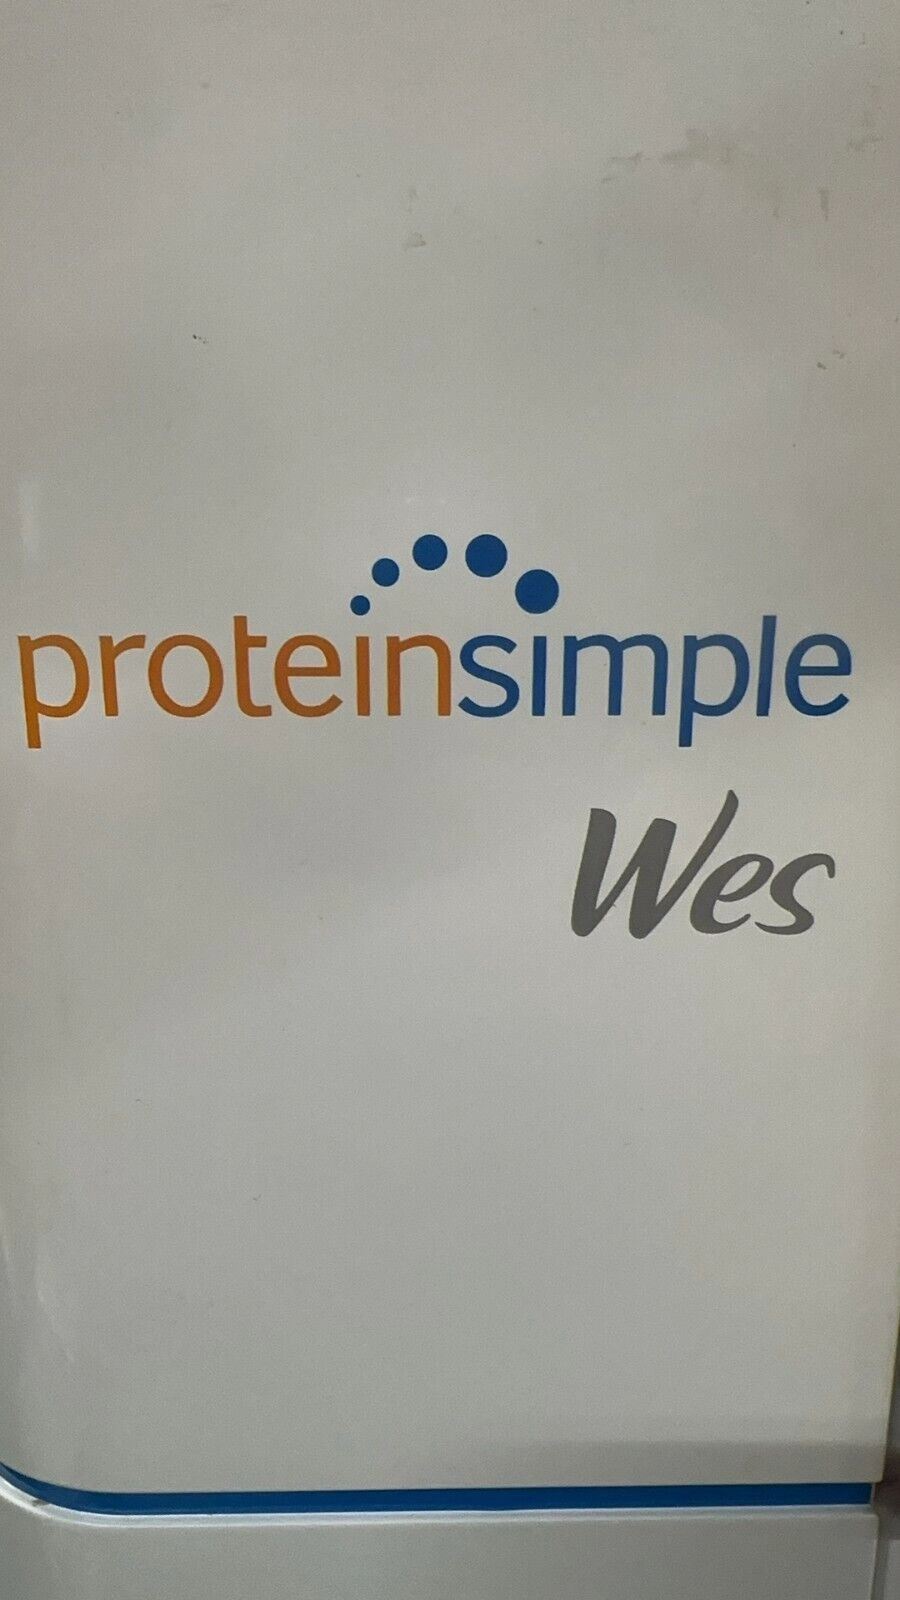 OEM ProteinSimple Wes software with compter and Do